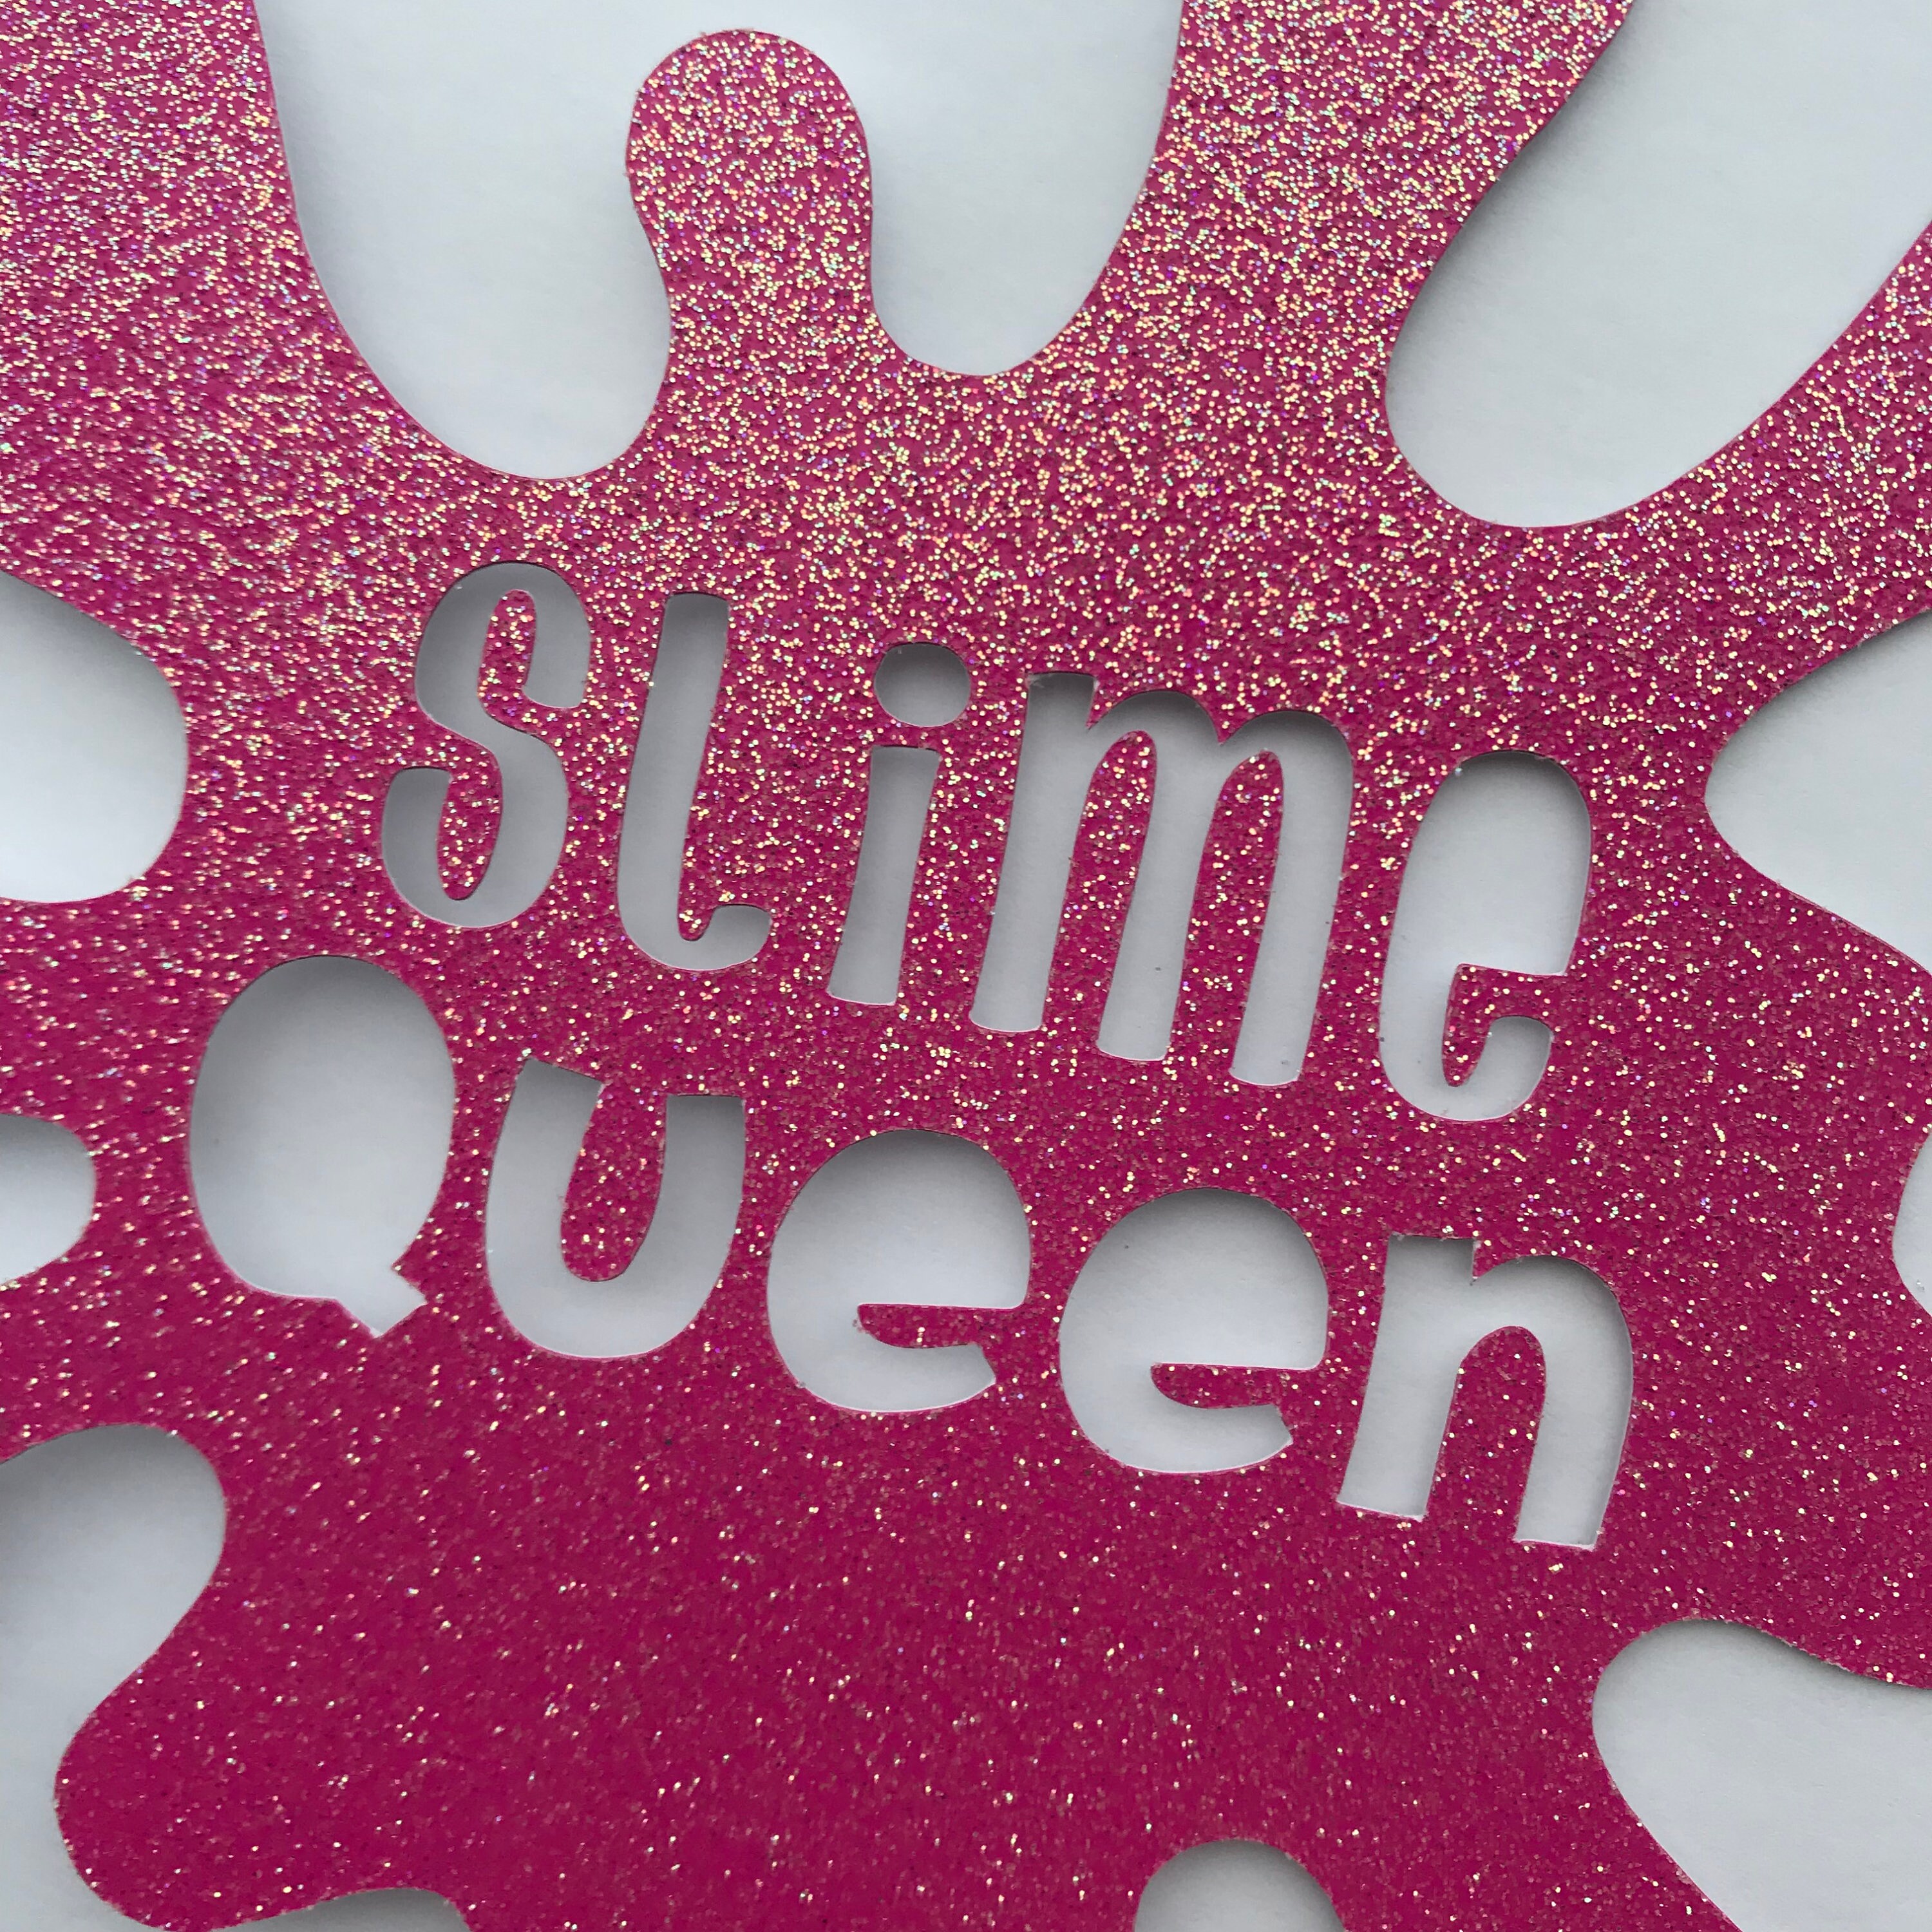 Halawawa Slime Queen Cake Topper, Happy Birthday Cake Topper Slime Shape  Cake Topper Art Theme Party Decor Picks for Baby Shower Girls Birthday  Party